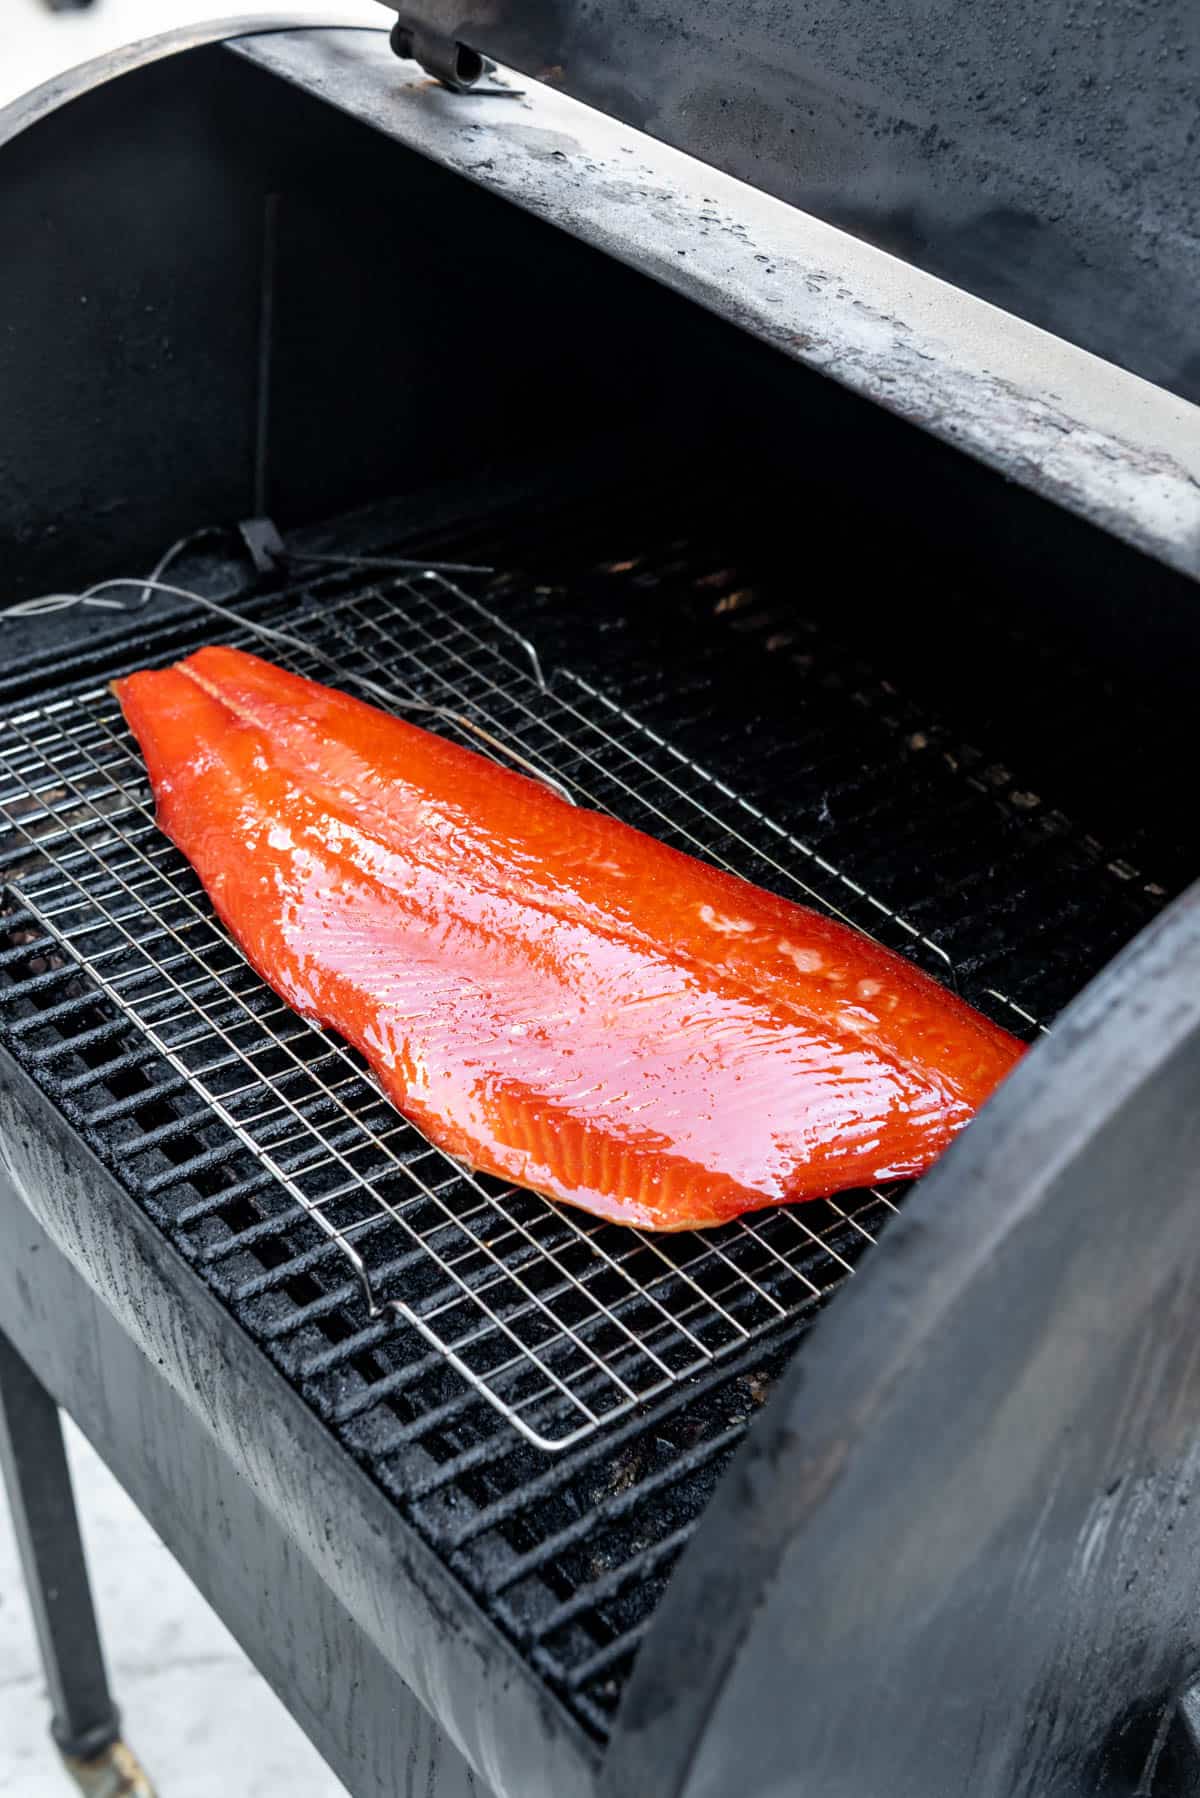 An image of a large piece of salmon on a pellet smoker.